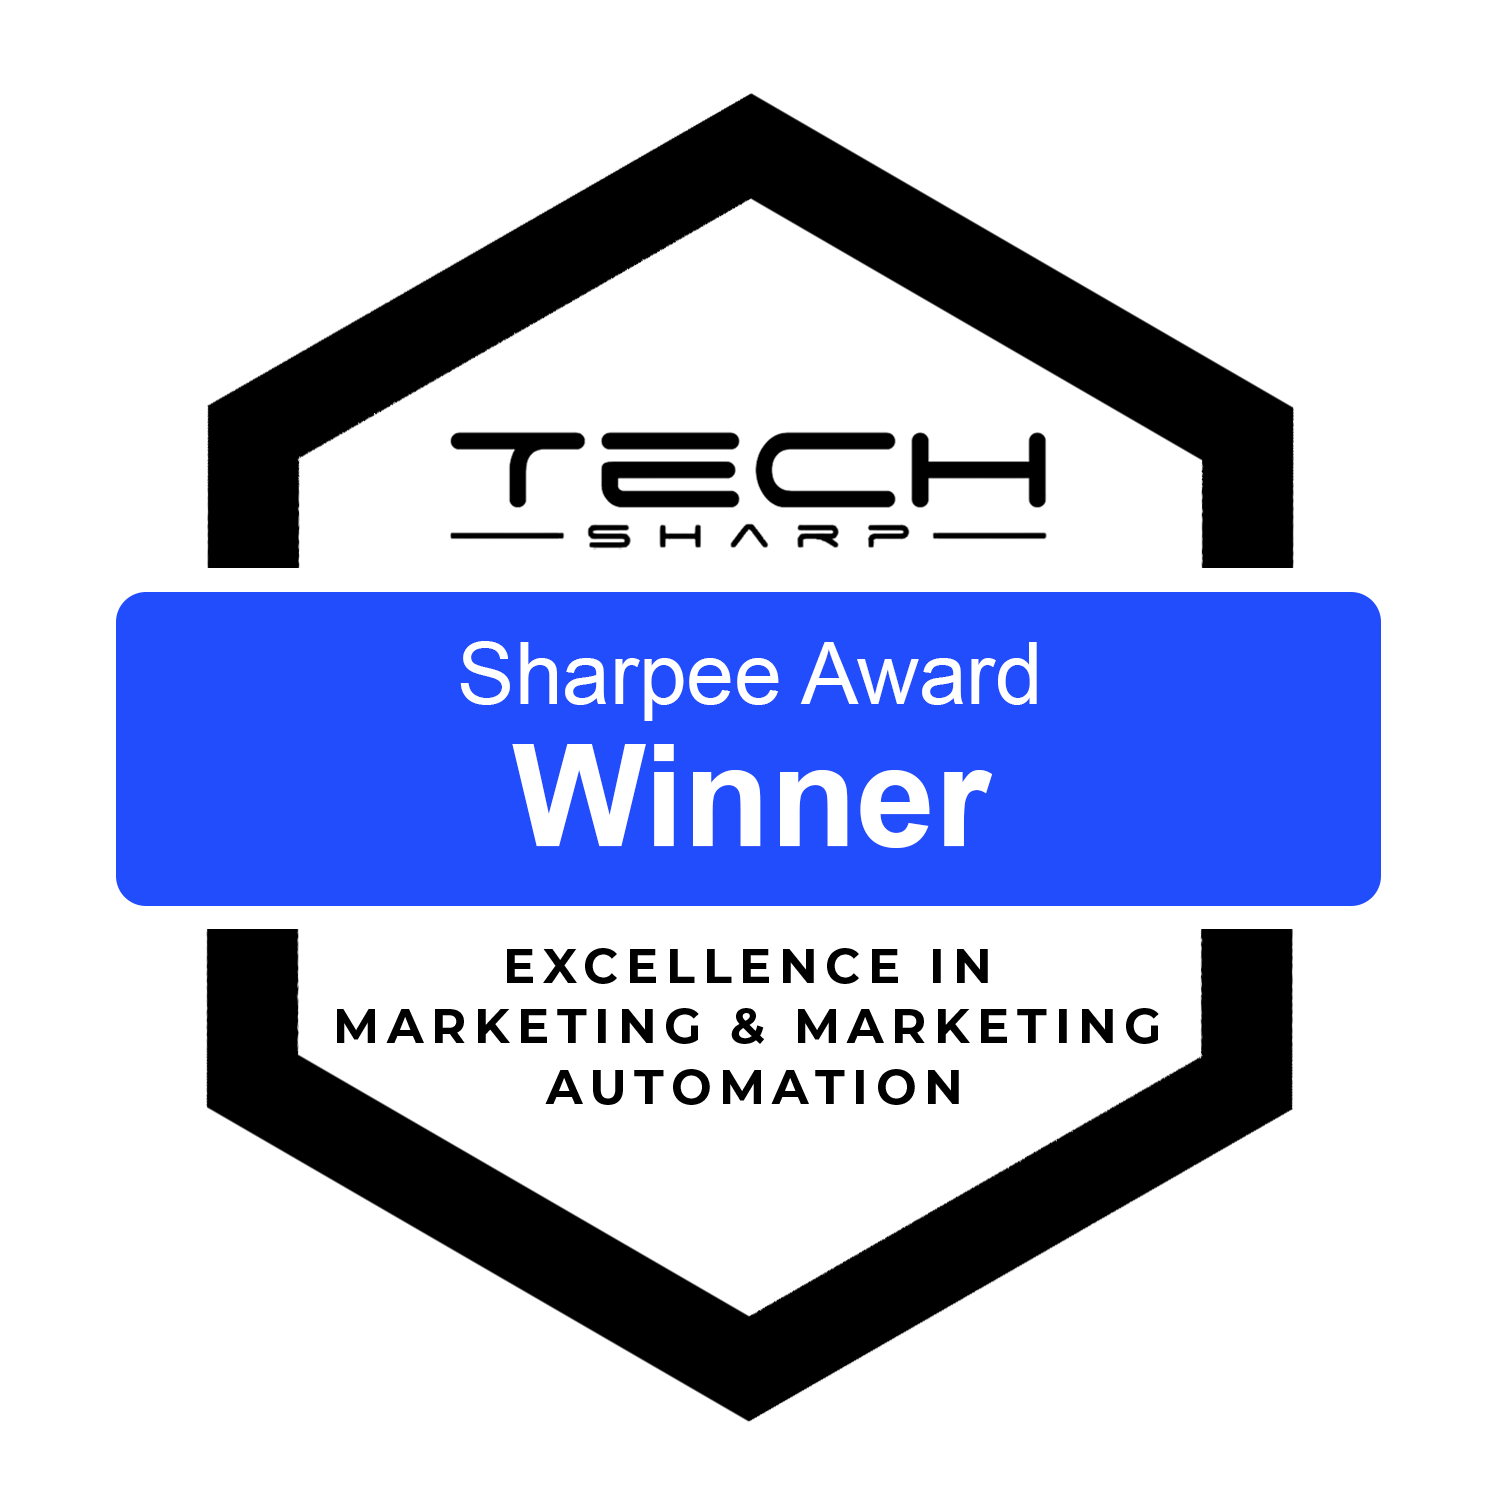 A agência Cleverman Inc., de New York, United States, conquistou o prêmio Sharpee Award for Excellence in Business Process Automation & Marketing